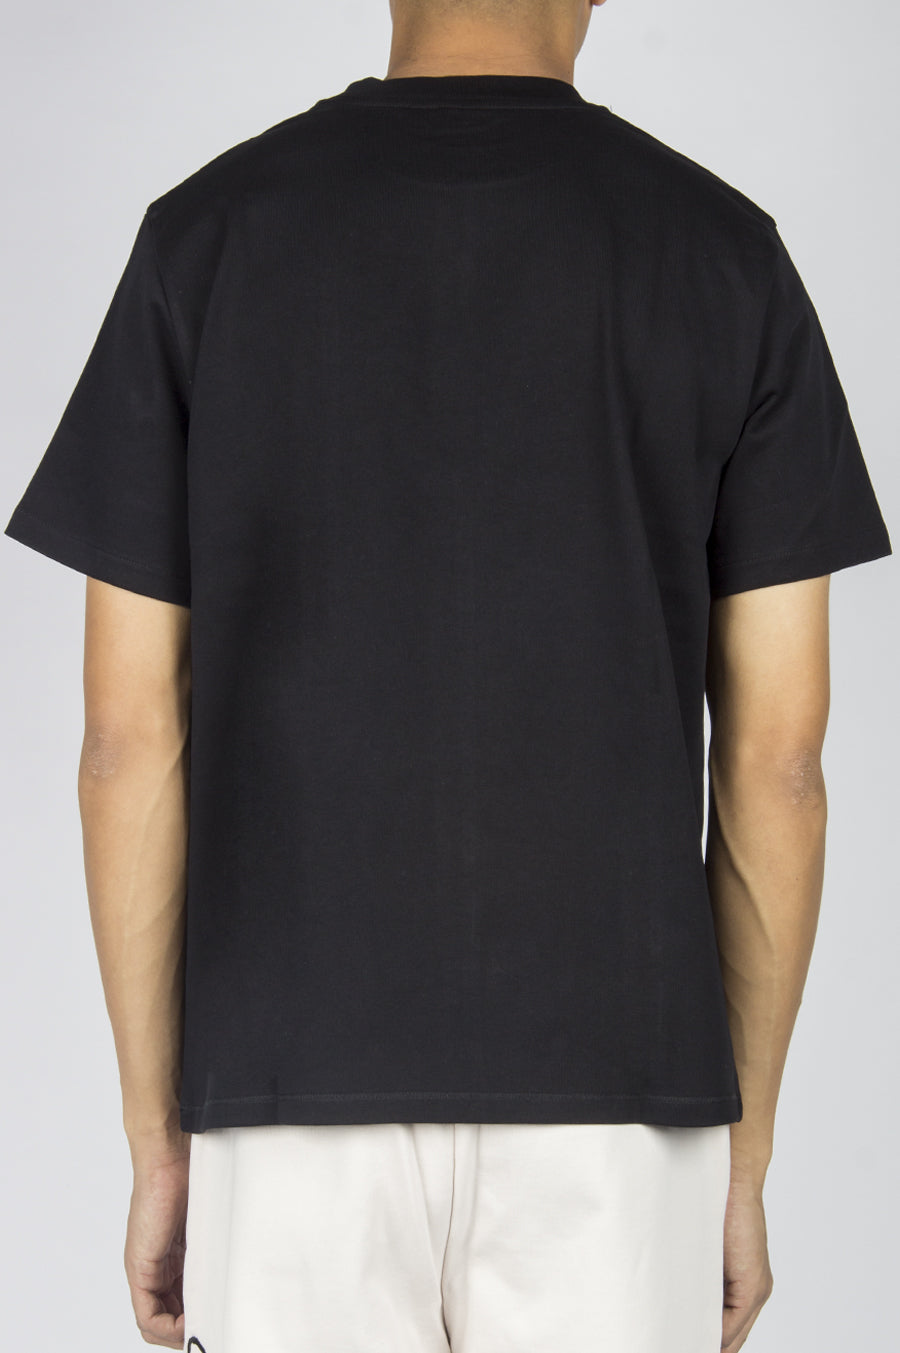 SECOND LAYER STRUCTURED JERSEY CROPPED T-SHIRT BLACK - BLENDS